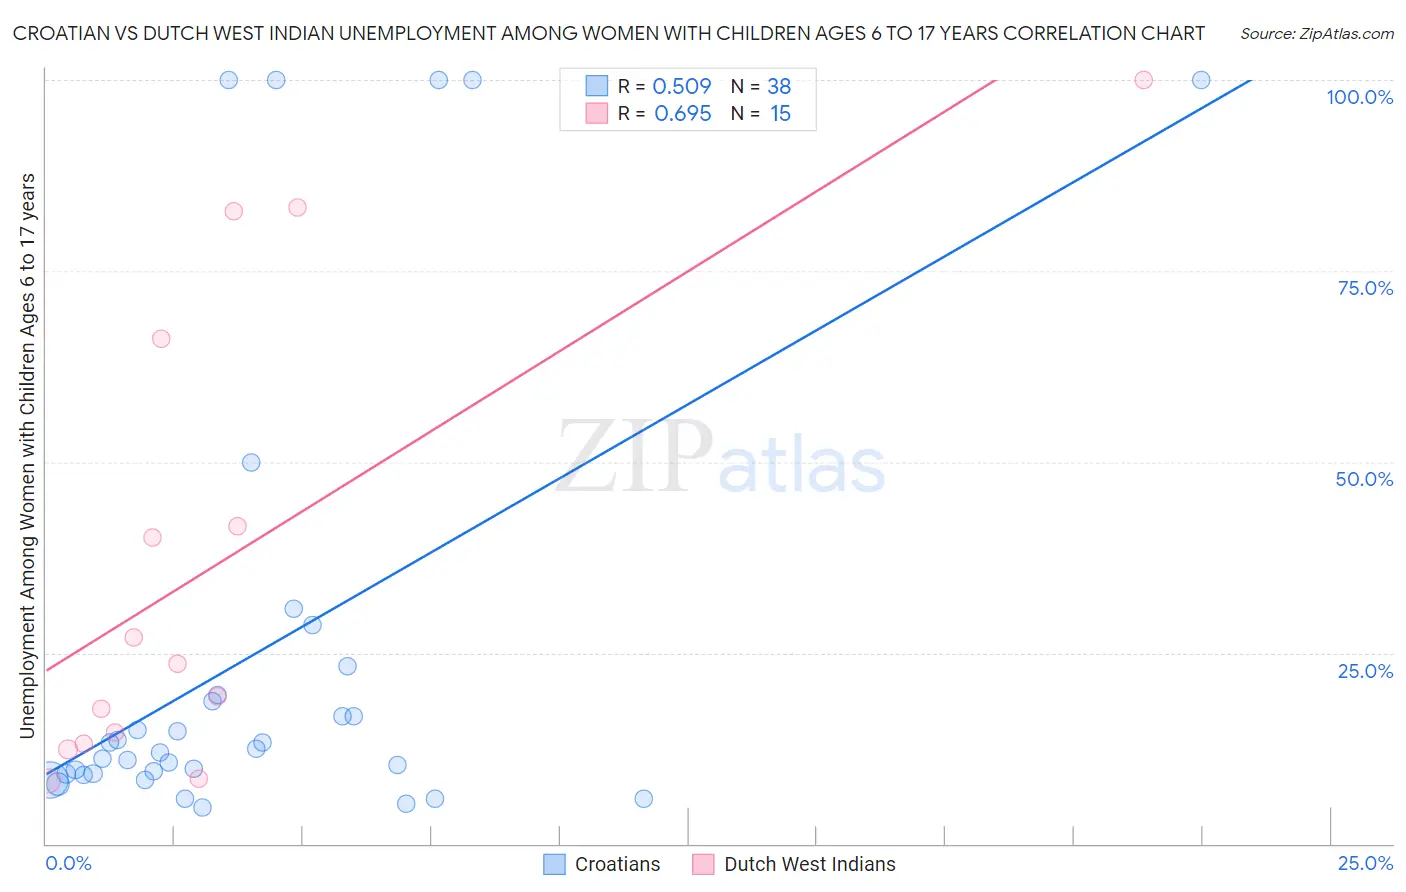 Croatian vs Dutch West Indian Unemployment Among Women with Children Ages 6 to 17 years